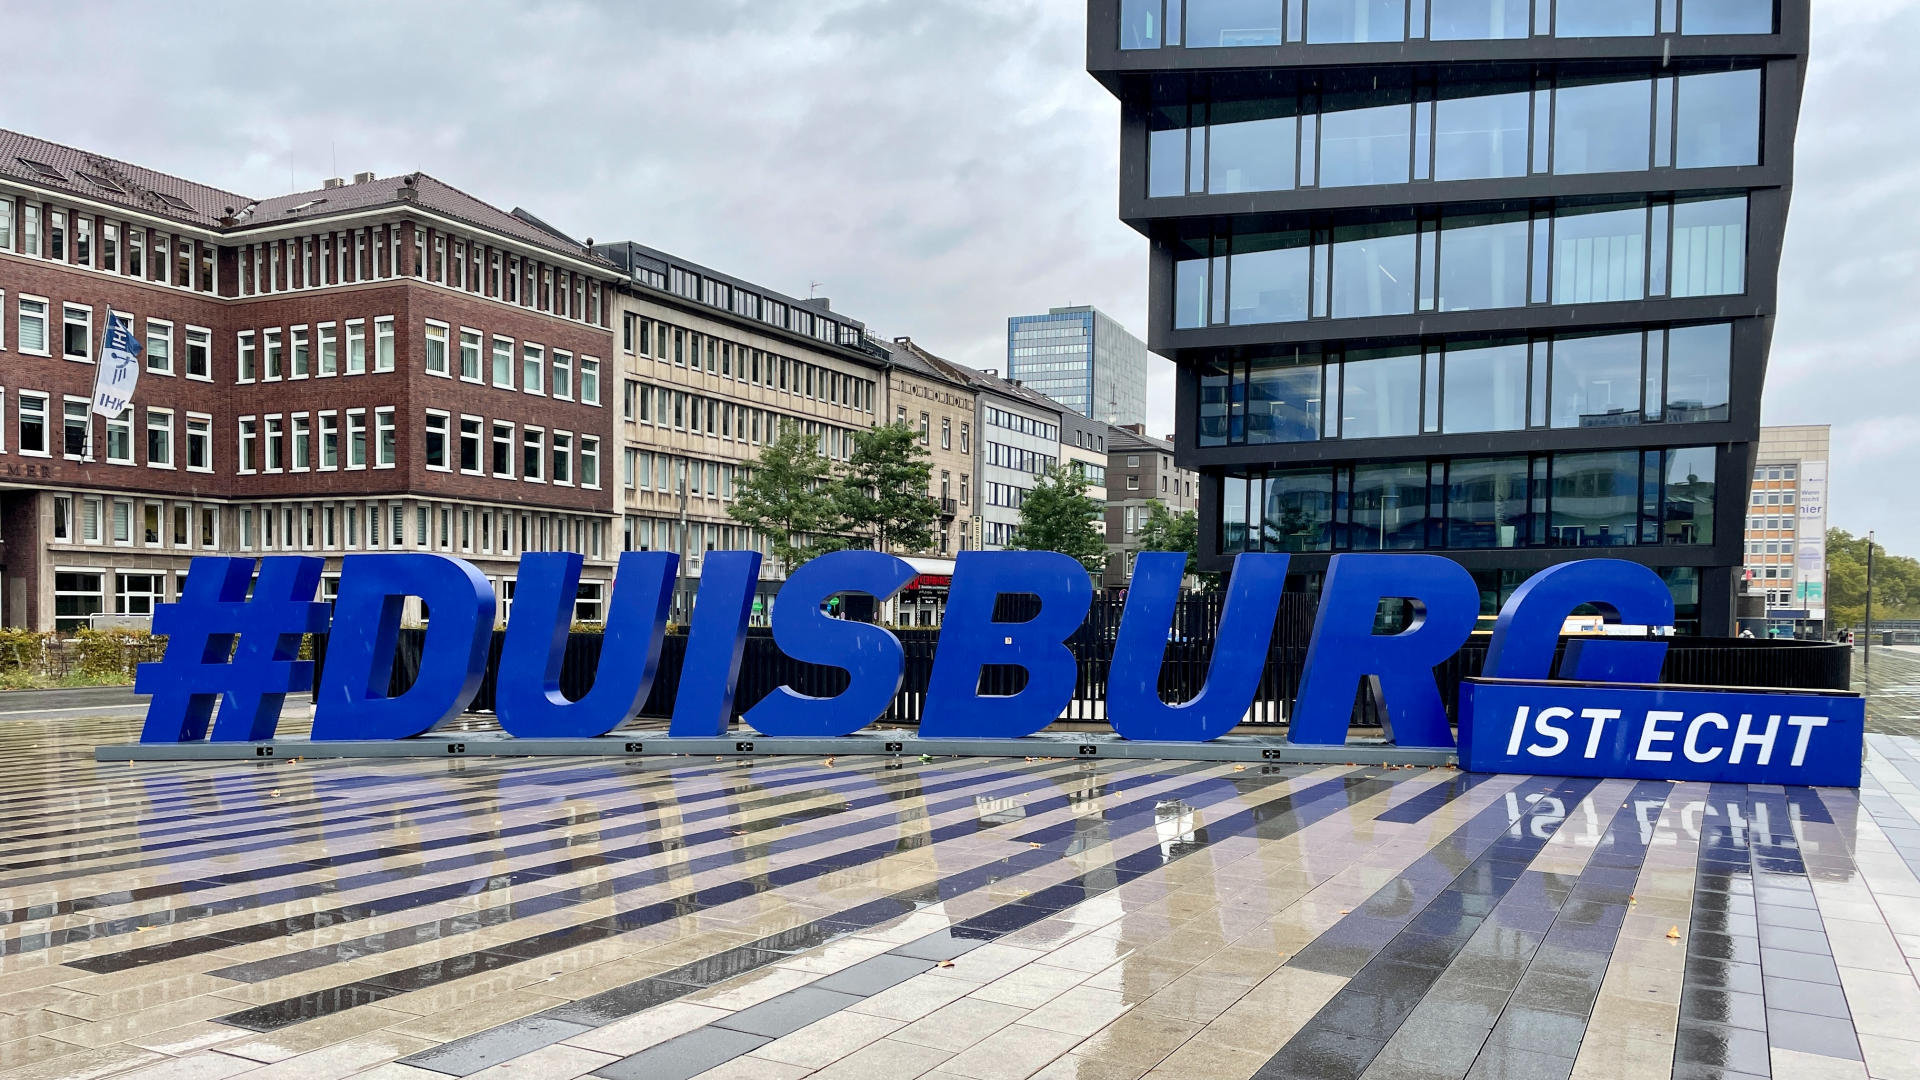 Increased trade with China helps reshape German city of Duisburg